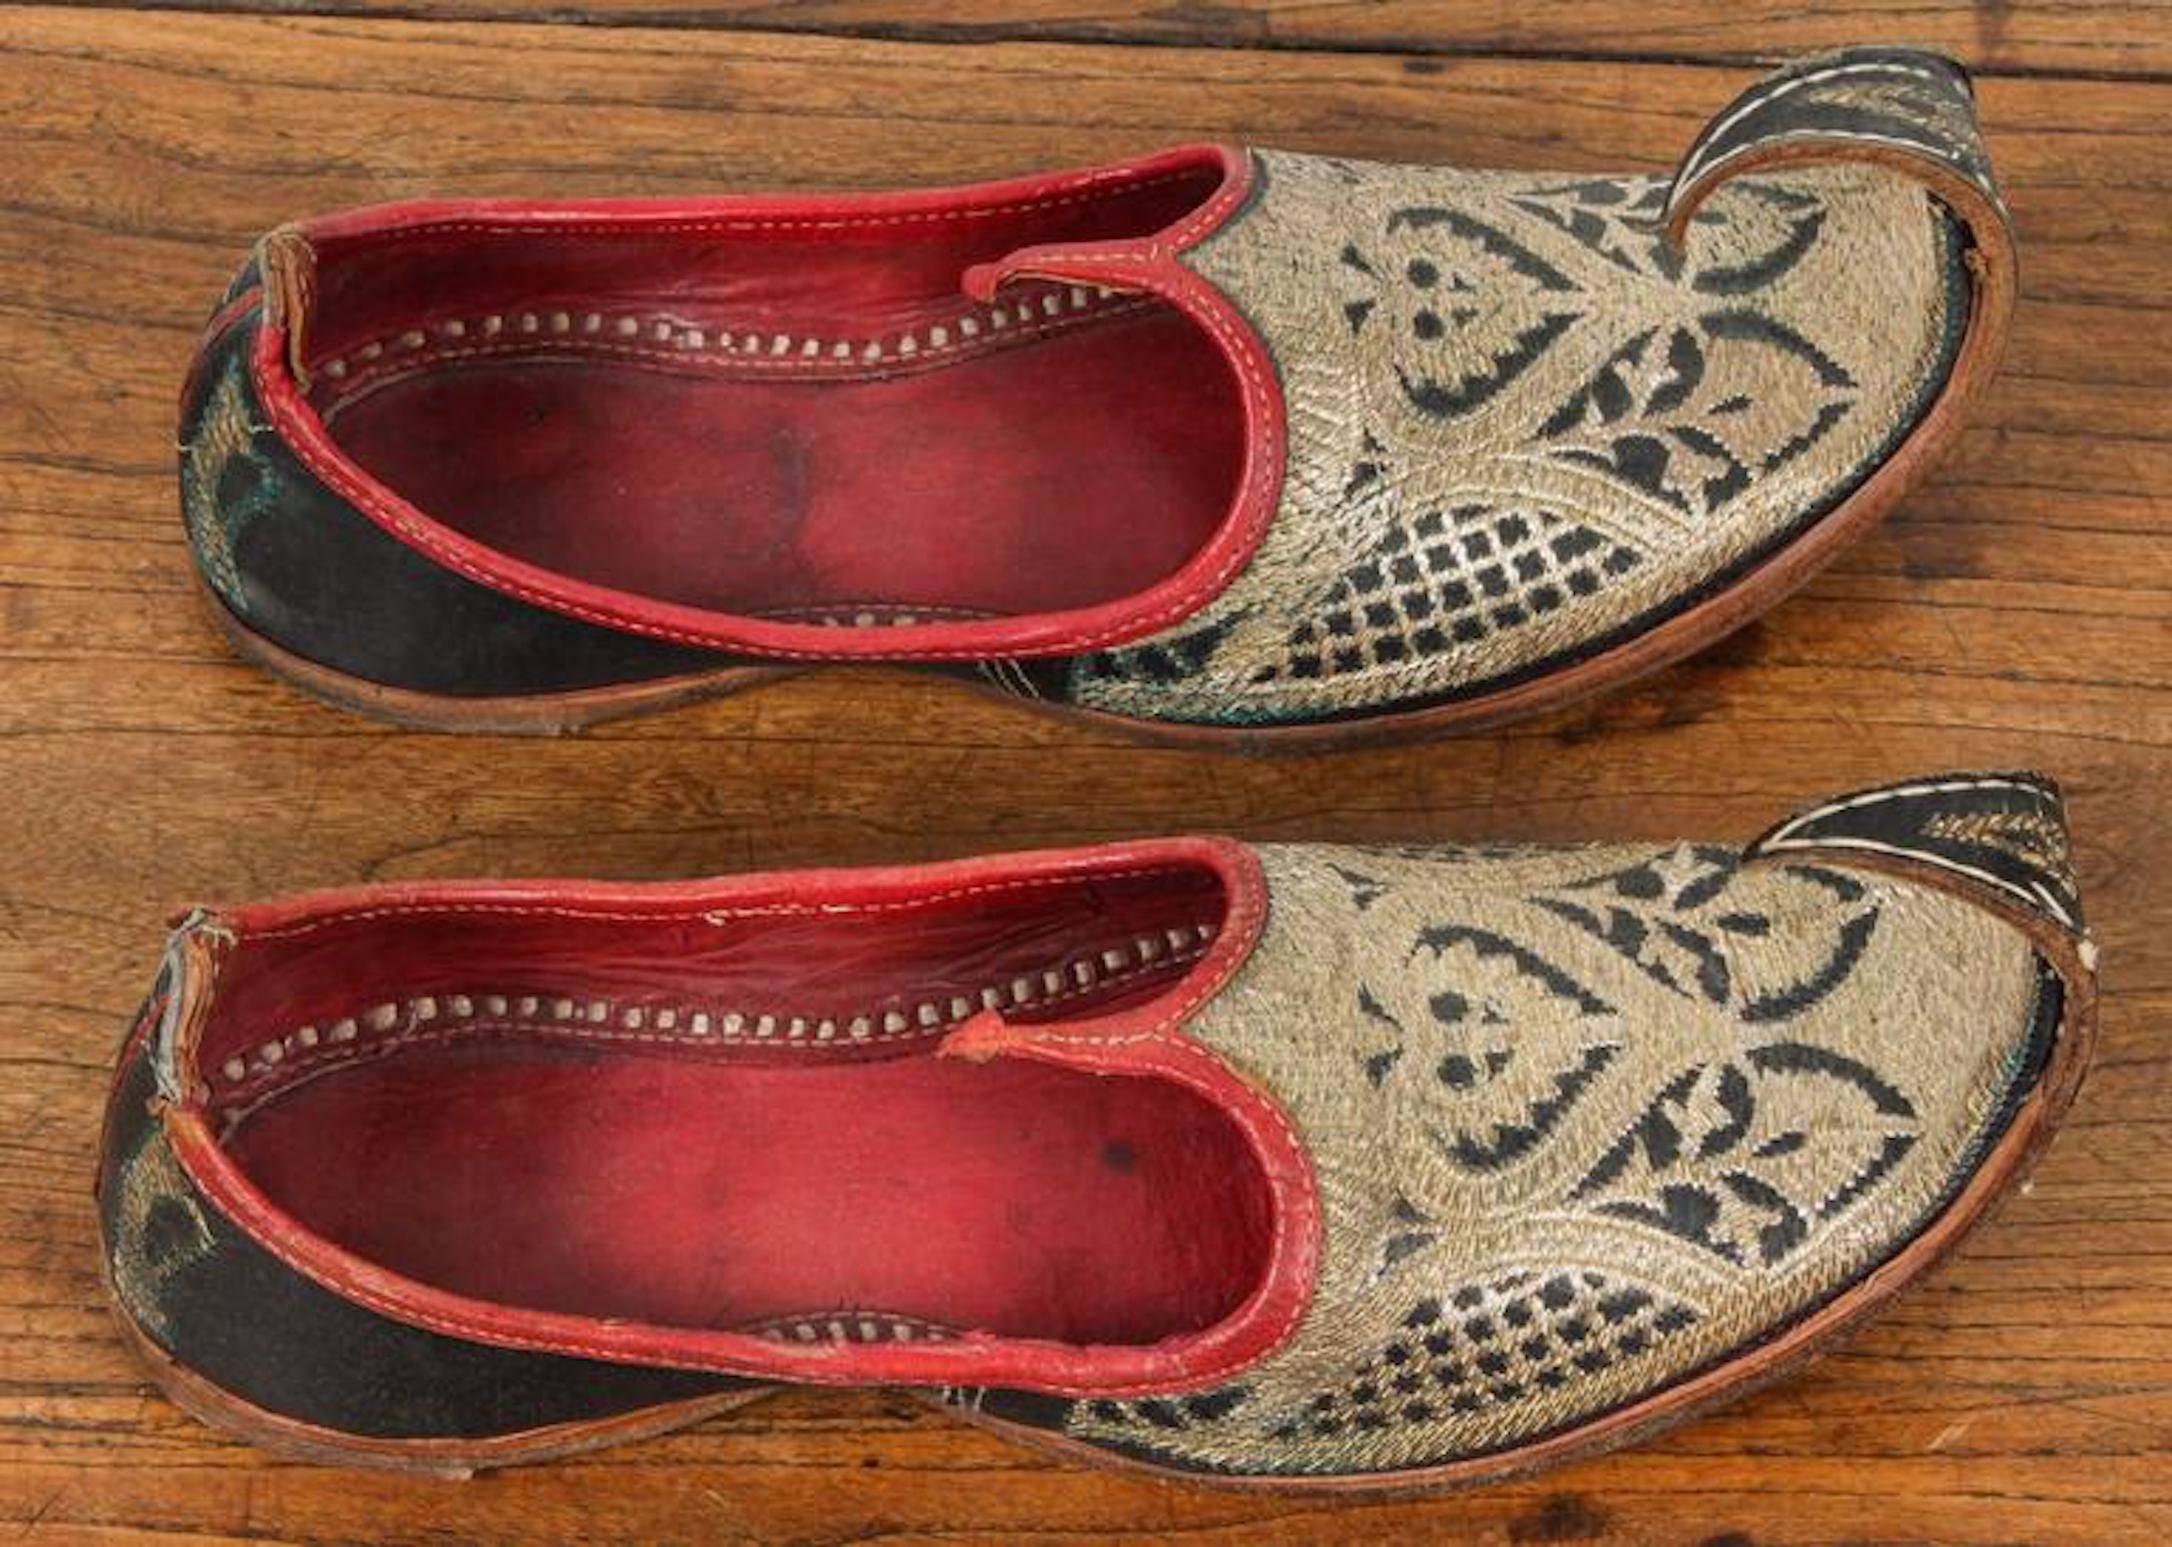 Amazing vintage Middle Eastern black and red leather with gold embroidered shoes.
Ceremonial wedding slippers, embroidered with gold thread. 
Aladdin, Ali Baba Arabic genie style with gold and leather sole and classic curled toe amazing to use as